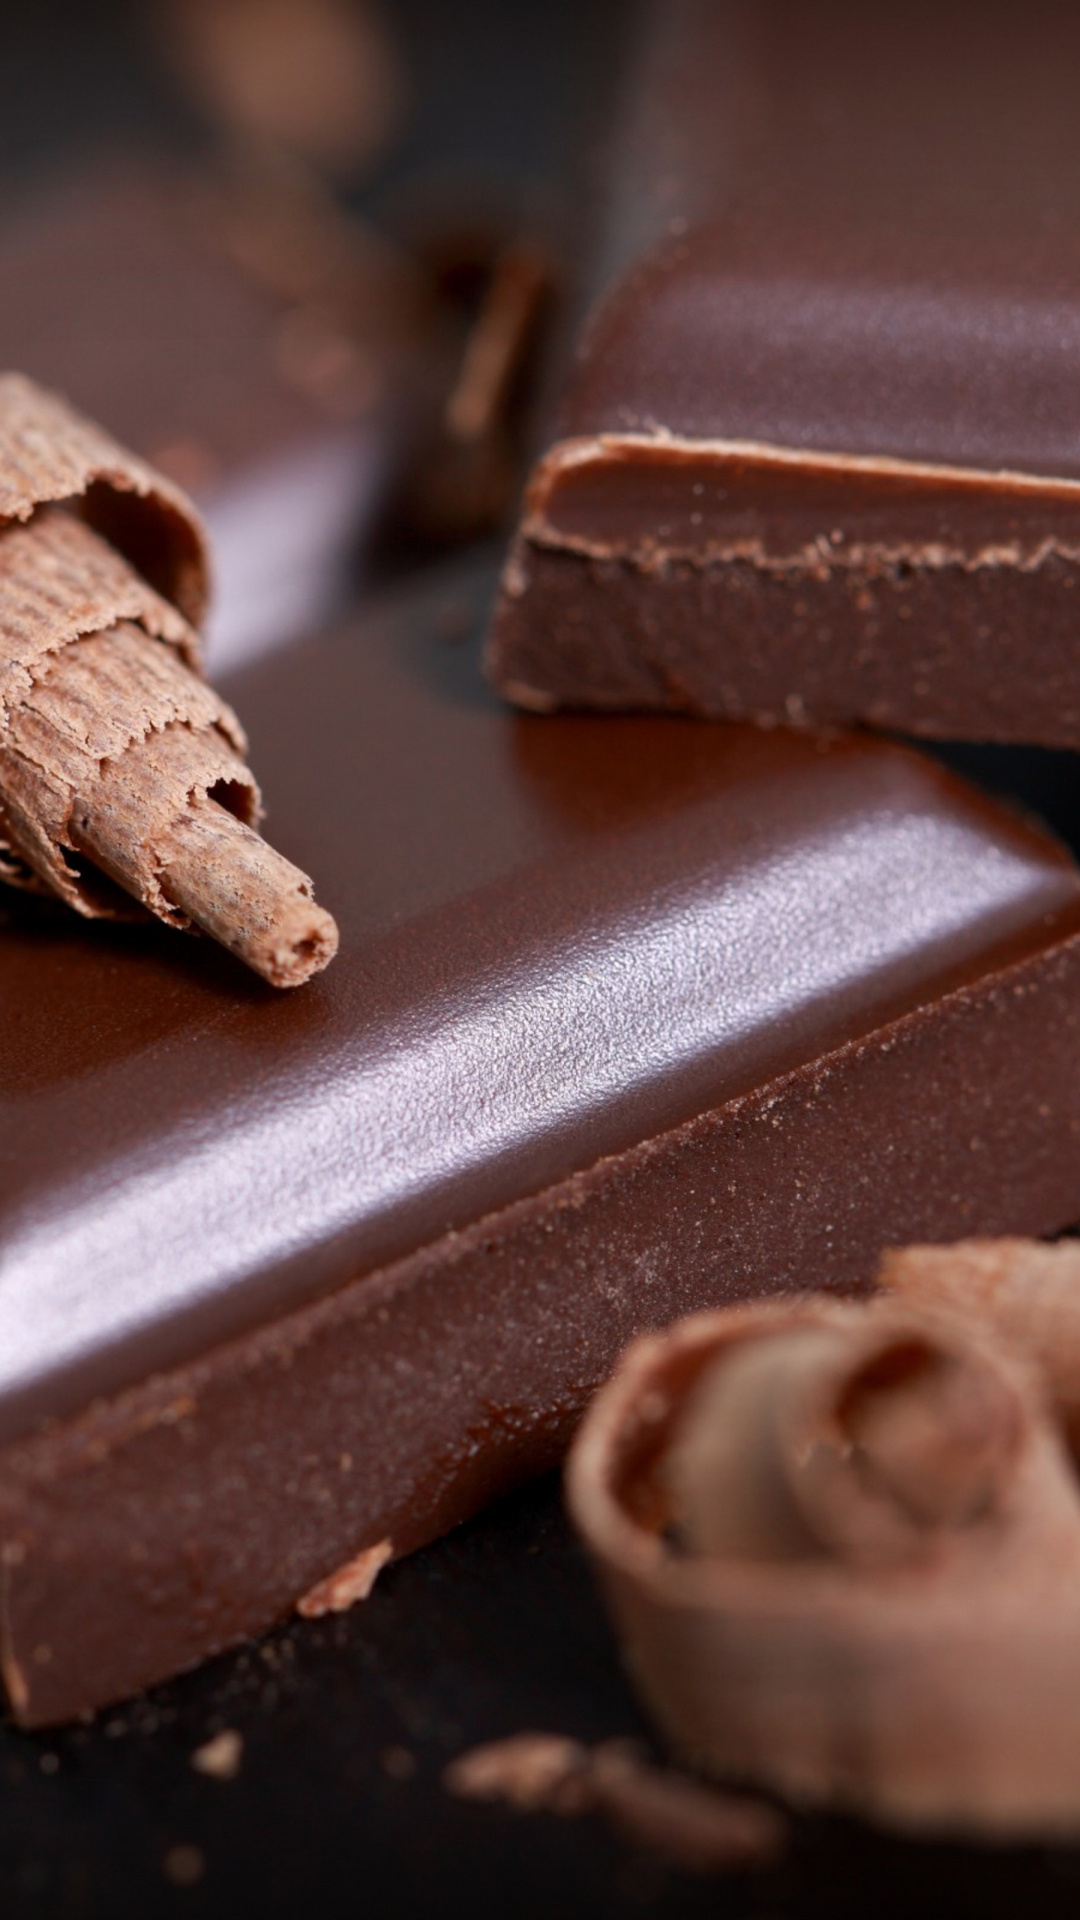 Chocolate: A rich source of fiber, loaded with iron, magnesium, zinc, copper. 1080x1920 Full HD Background.